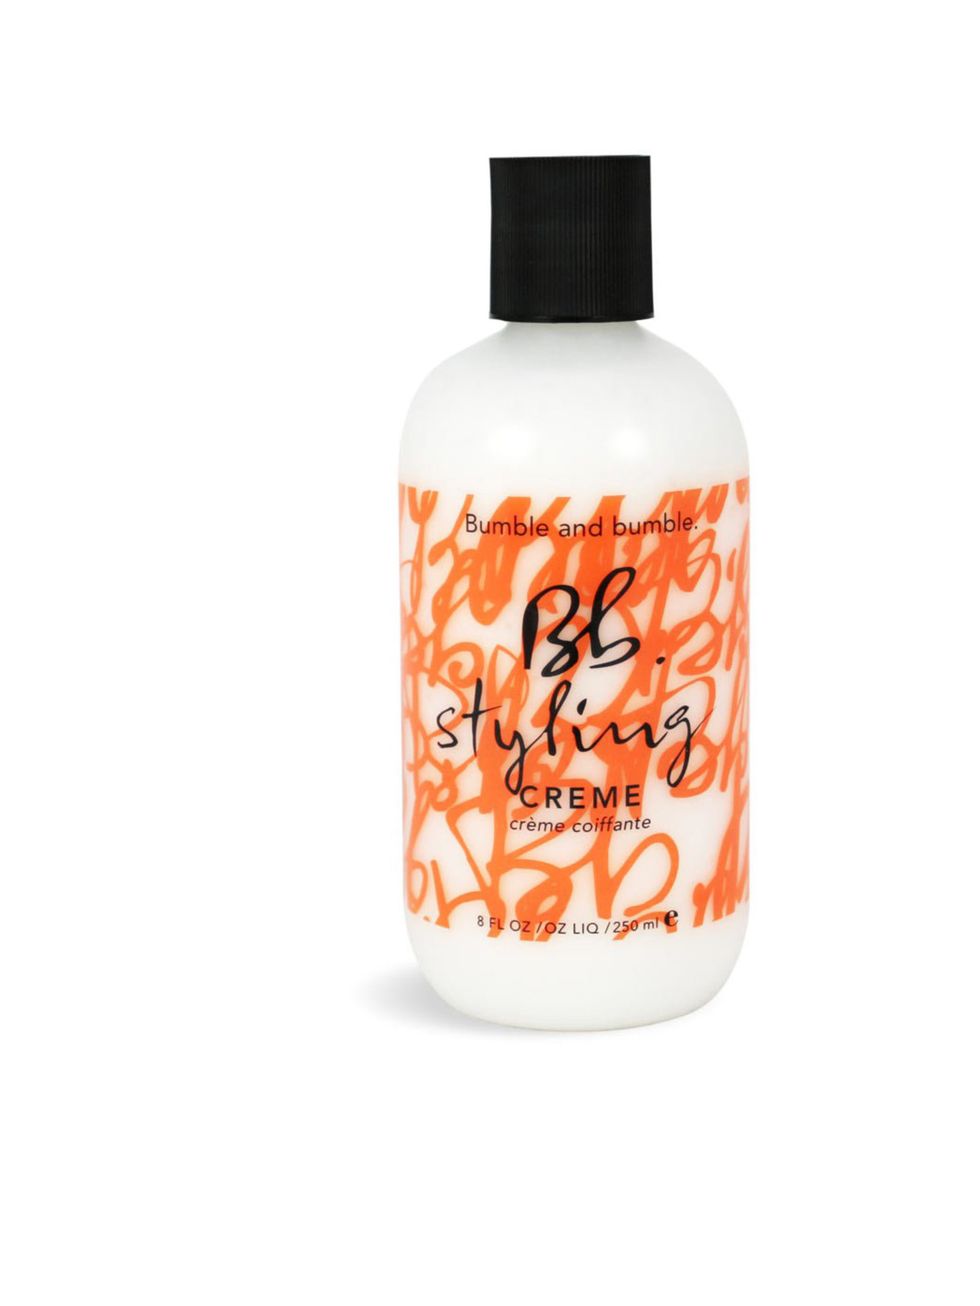 &lt;p&gt;&lt;a href=&quot;http://www.bumbleandbumble.co.uk/product/74/214/Products/Styling/Structure/styling-creme/index.tmpl&quot;&gt;Bumble and bumble&lt;/a&gt; Styling Creme, from &pound;6.50&lt;/p&gt;